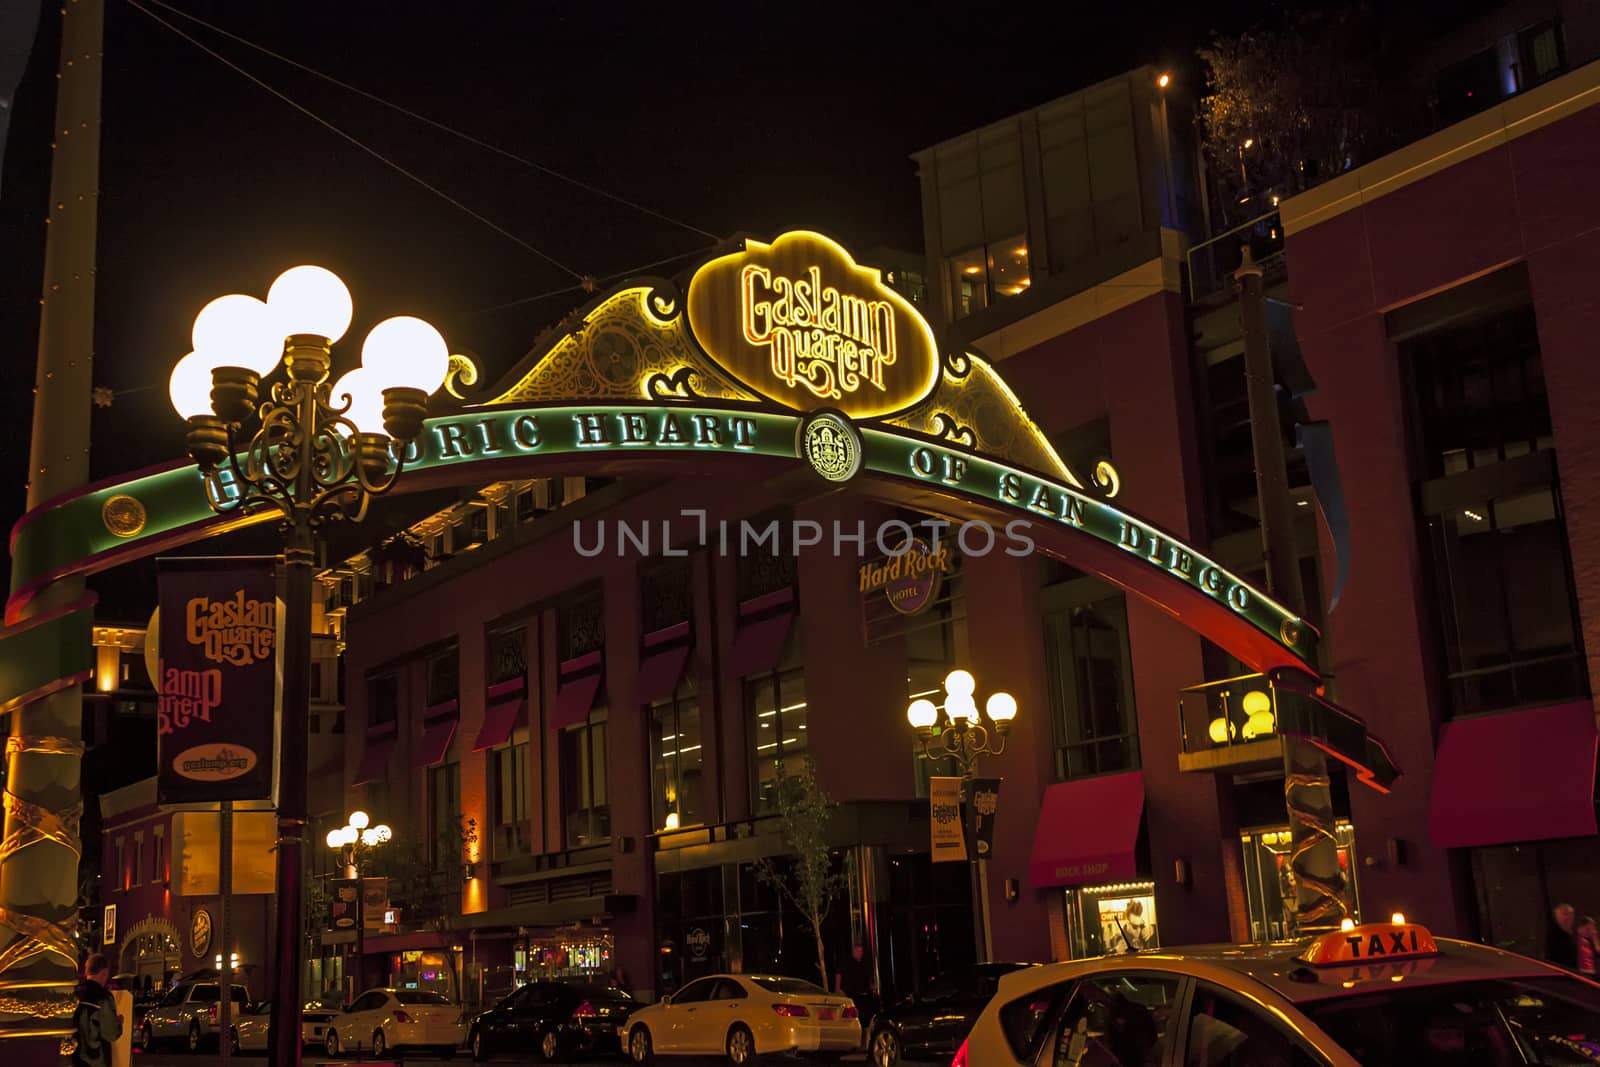 Entrance to the Gaslamp Quarter of San Diego by marlen